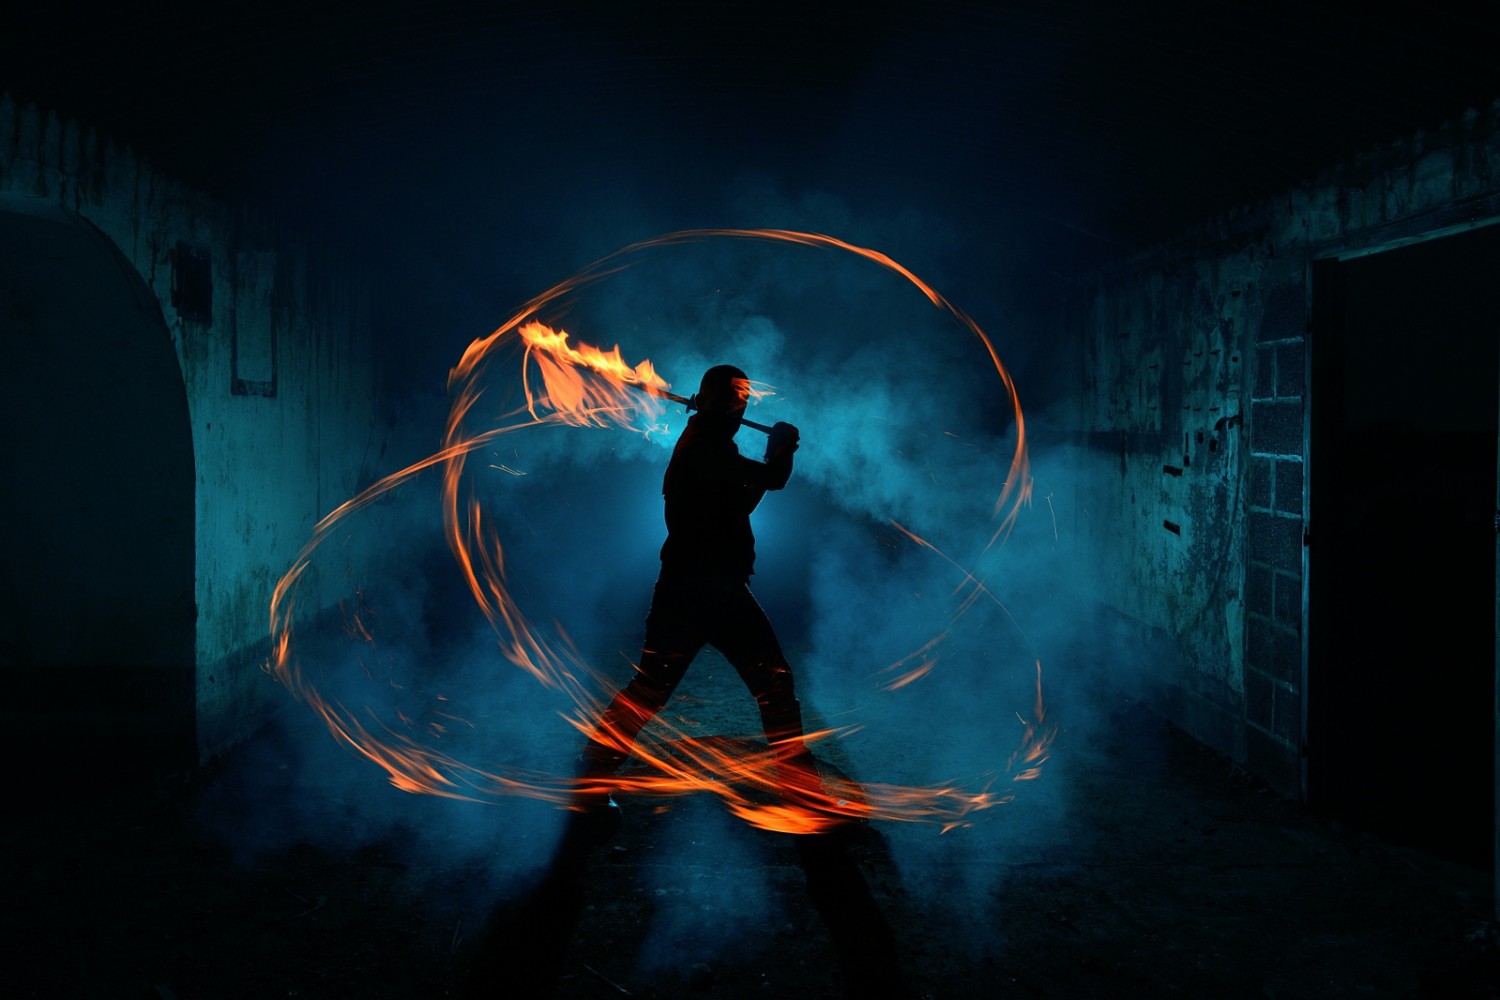 13 Epic Light Painting Shots on 500px